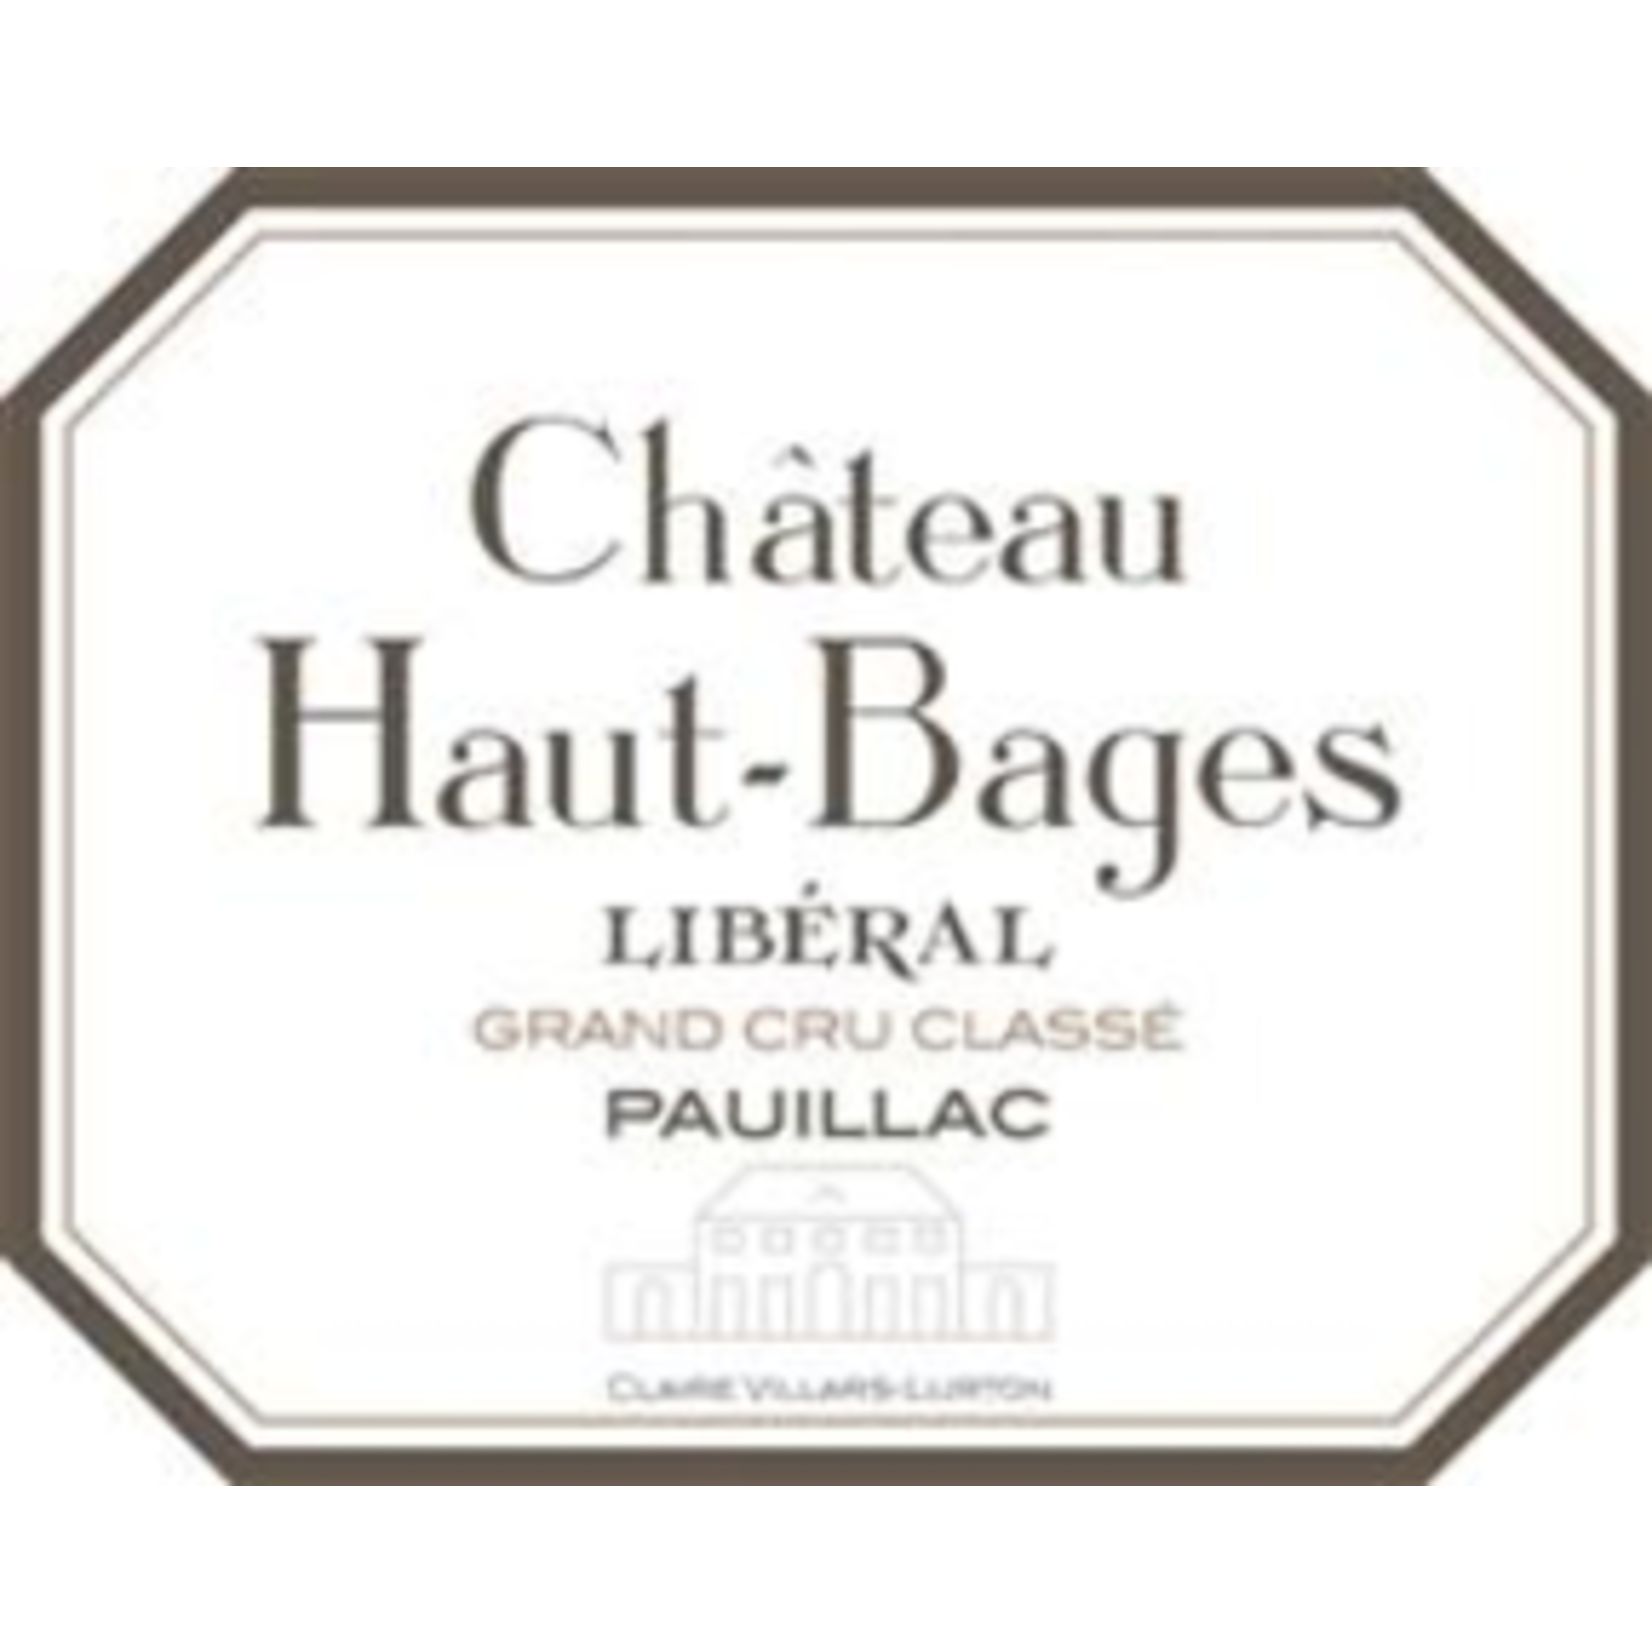 Wine Chateau Haut Bages Liberal 2015